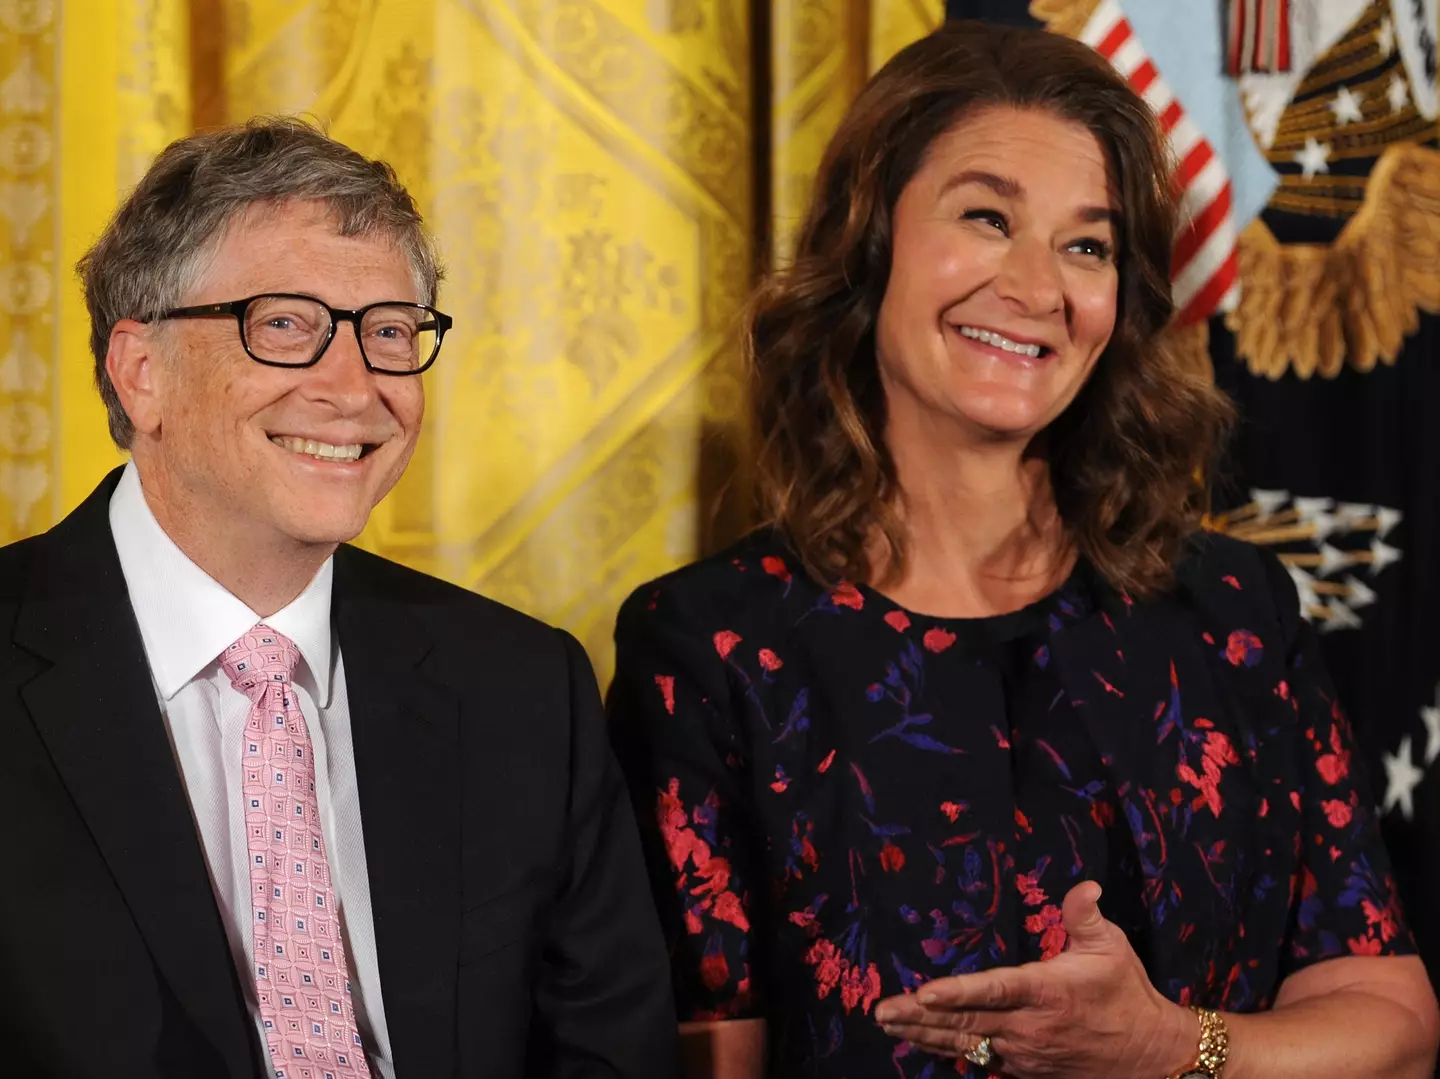 In other news, we recently told you how Bill Gates opened up about how he and ex-wife Melinda divided their wealth.